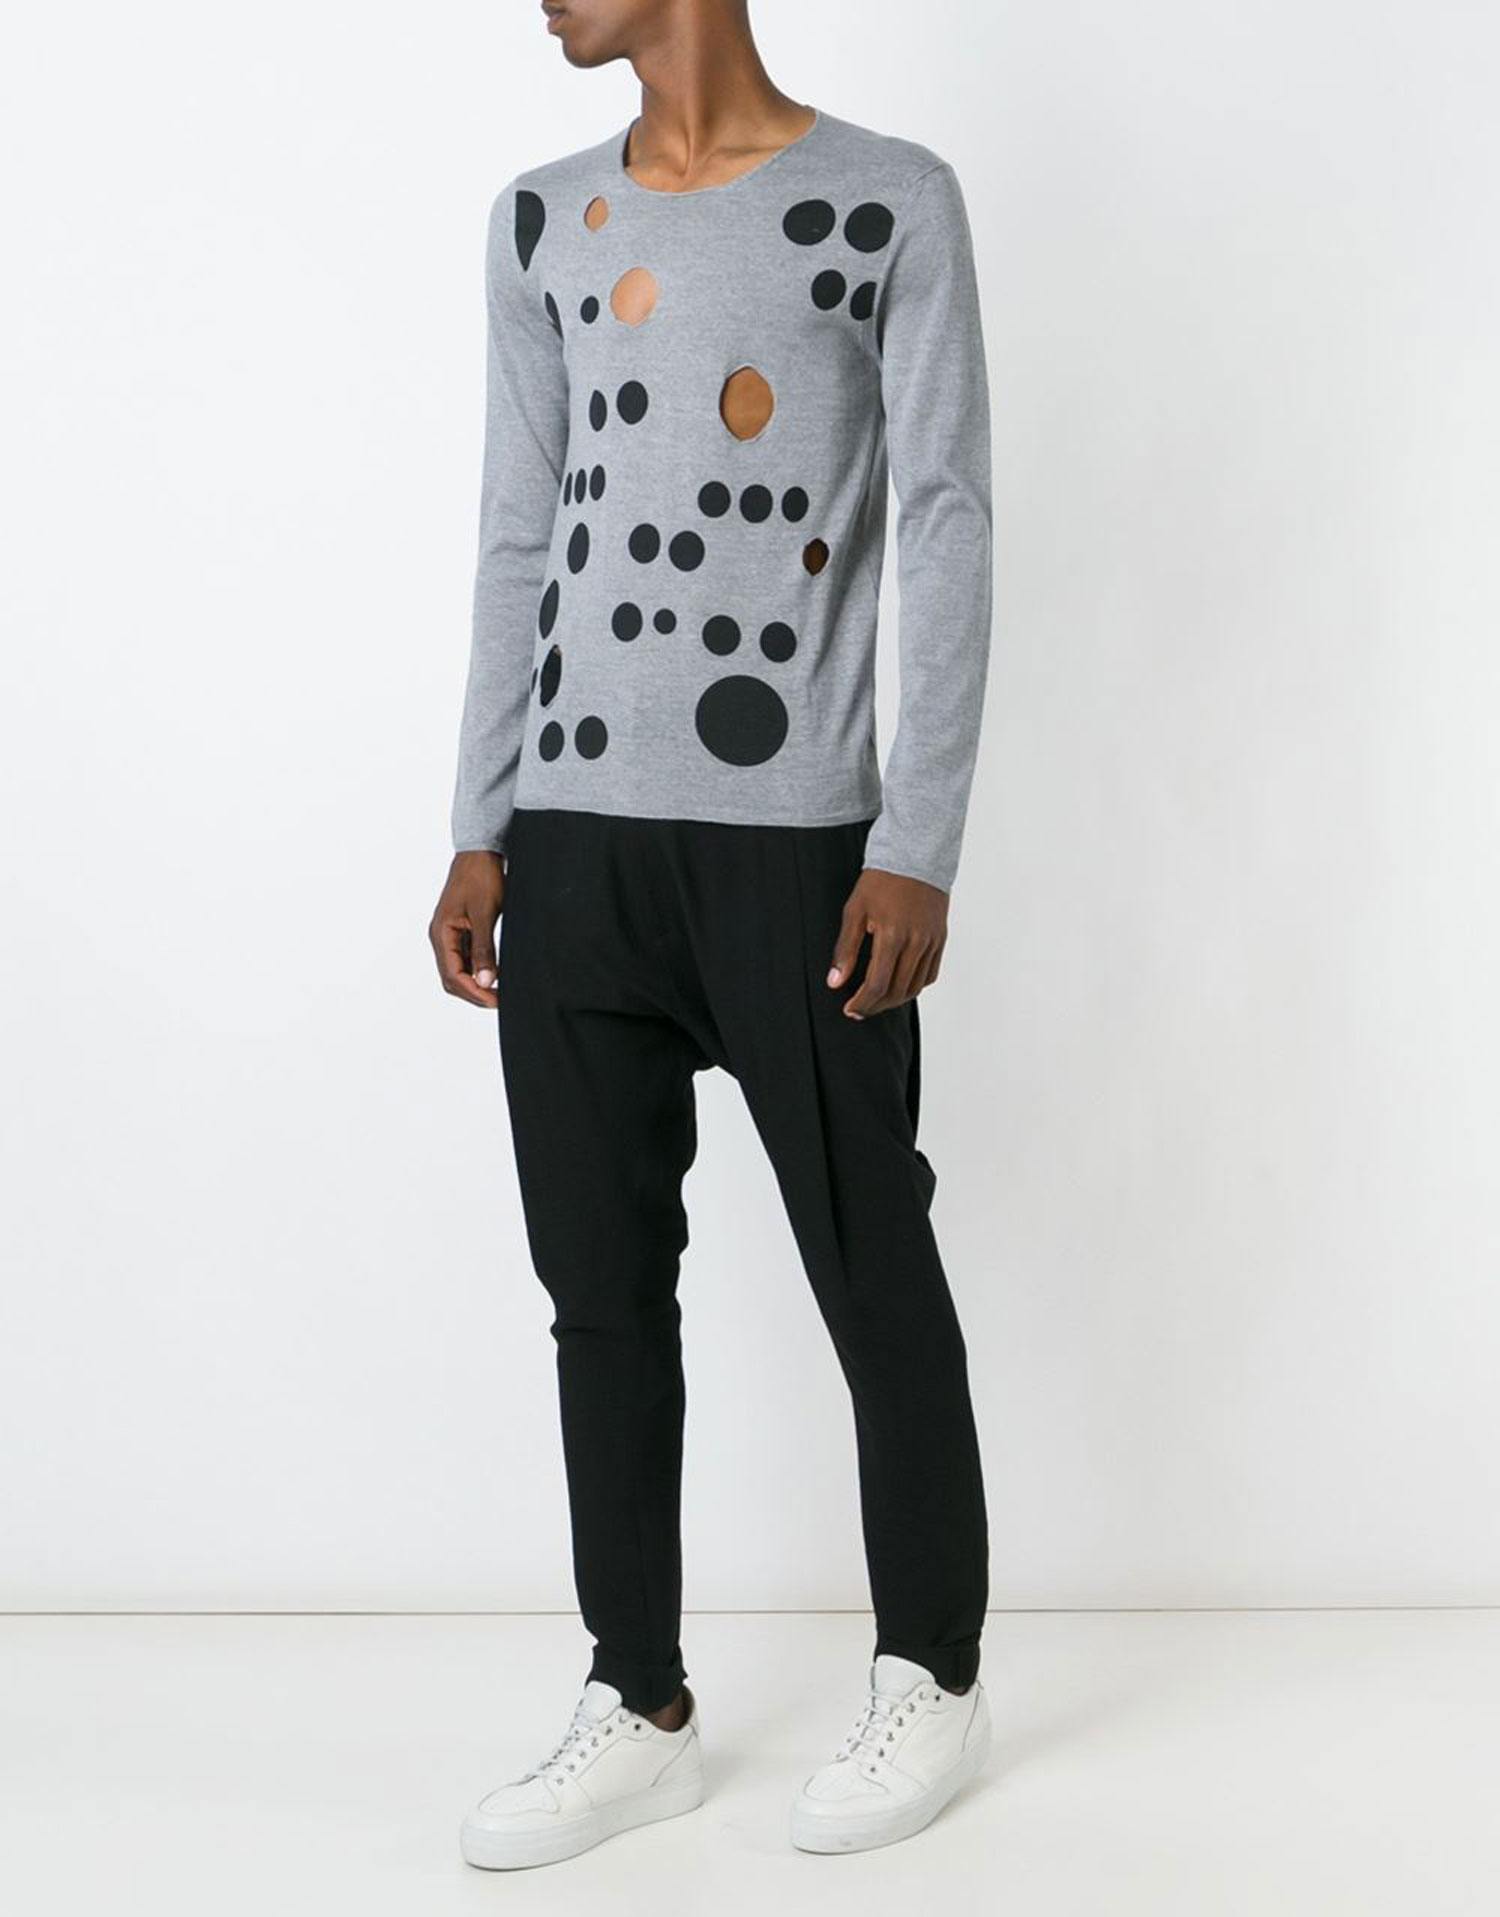 Trend-Lasercut-Herrenmode-Cut-Out-Fashion-Pullover-Cut-Outs